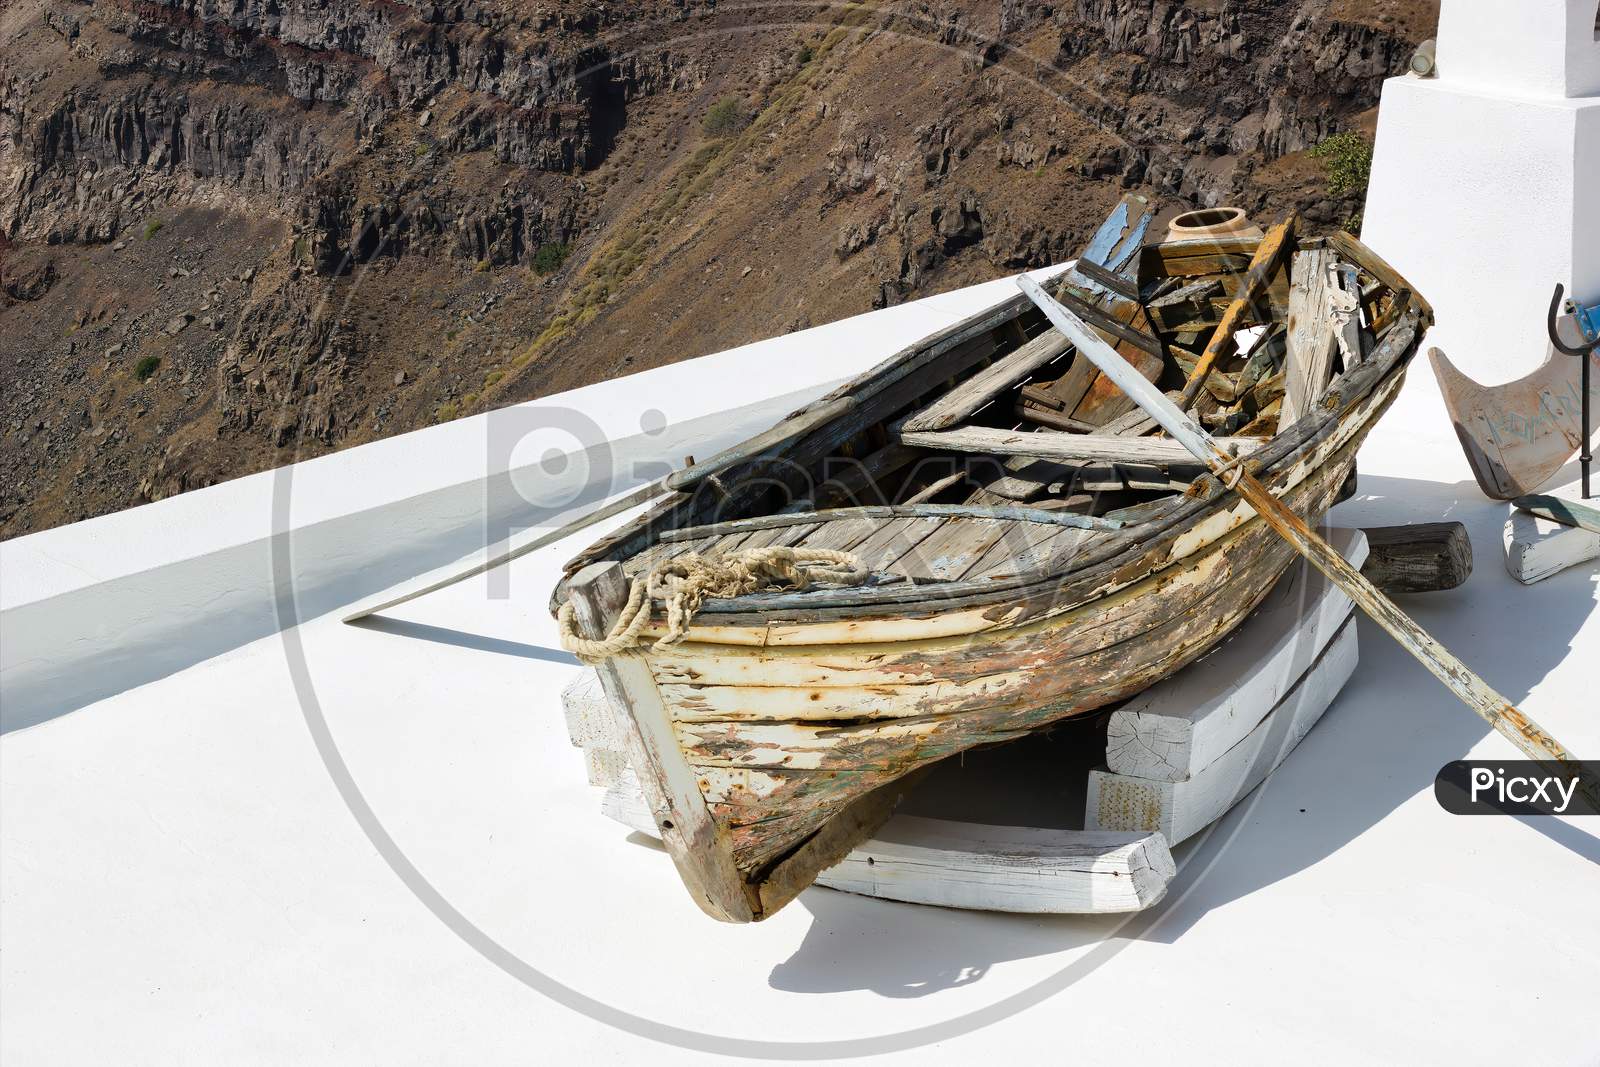 Santorini, Greece: A Wrecked Boat On A Roof At Firostefani Near Fira On A Greek Island Named Santorini. In The Background Is Skaros Rock Mountain Of Imerovigli